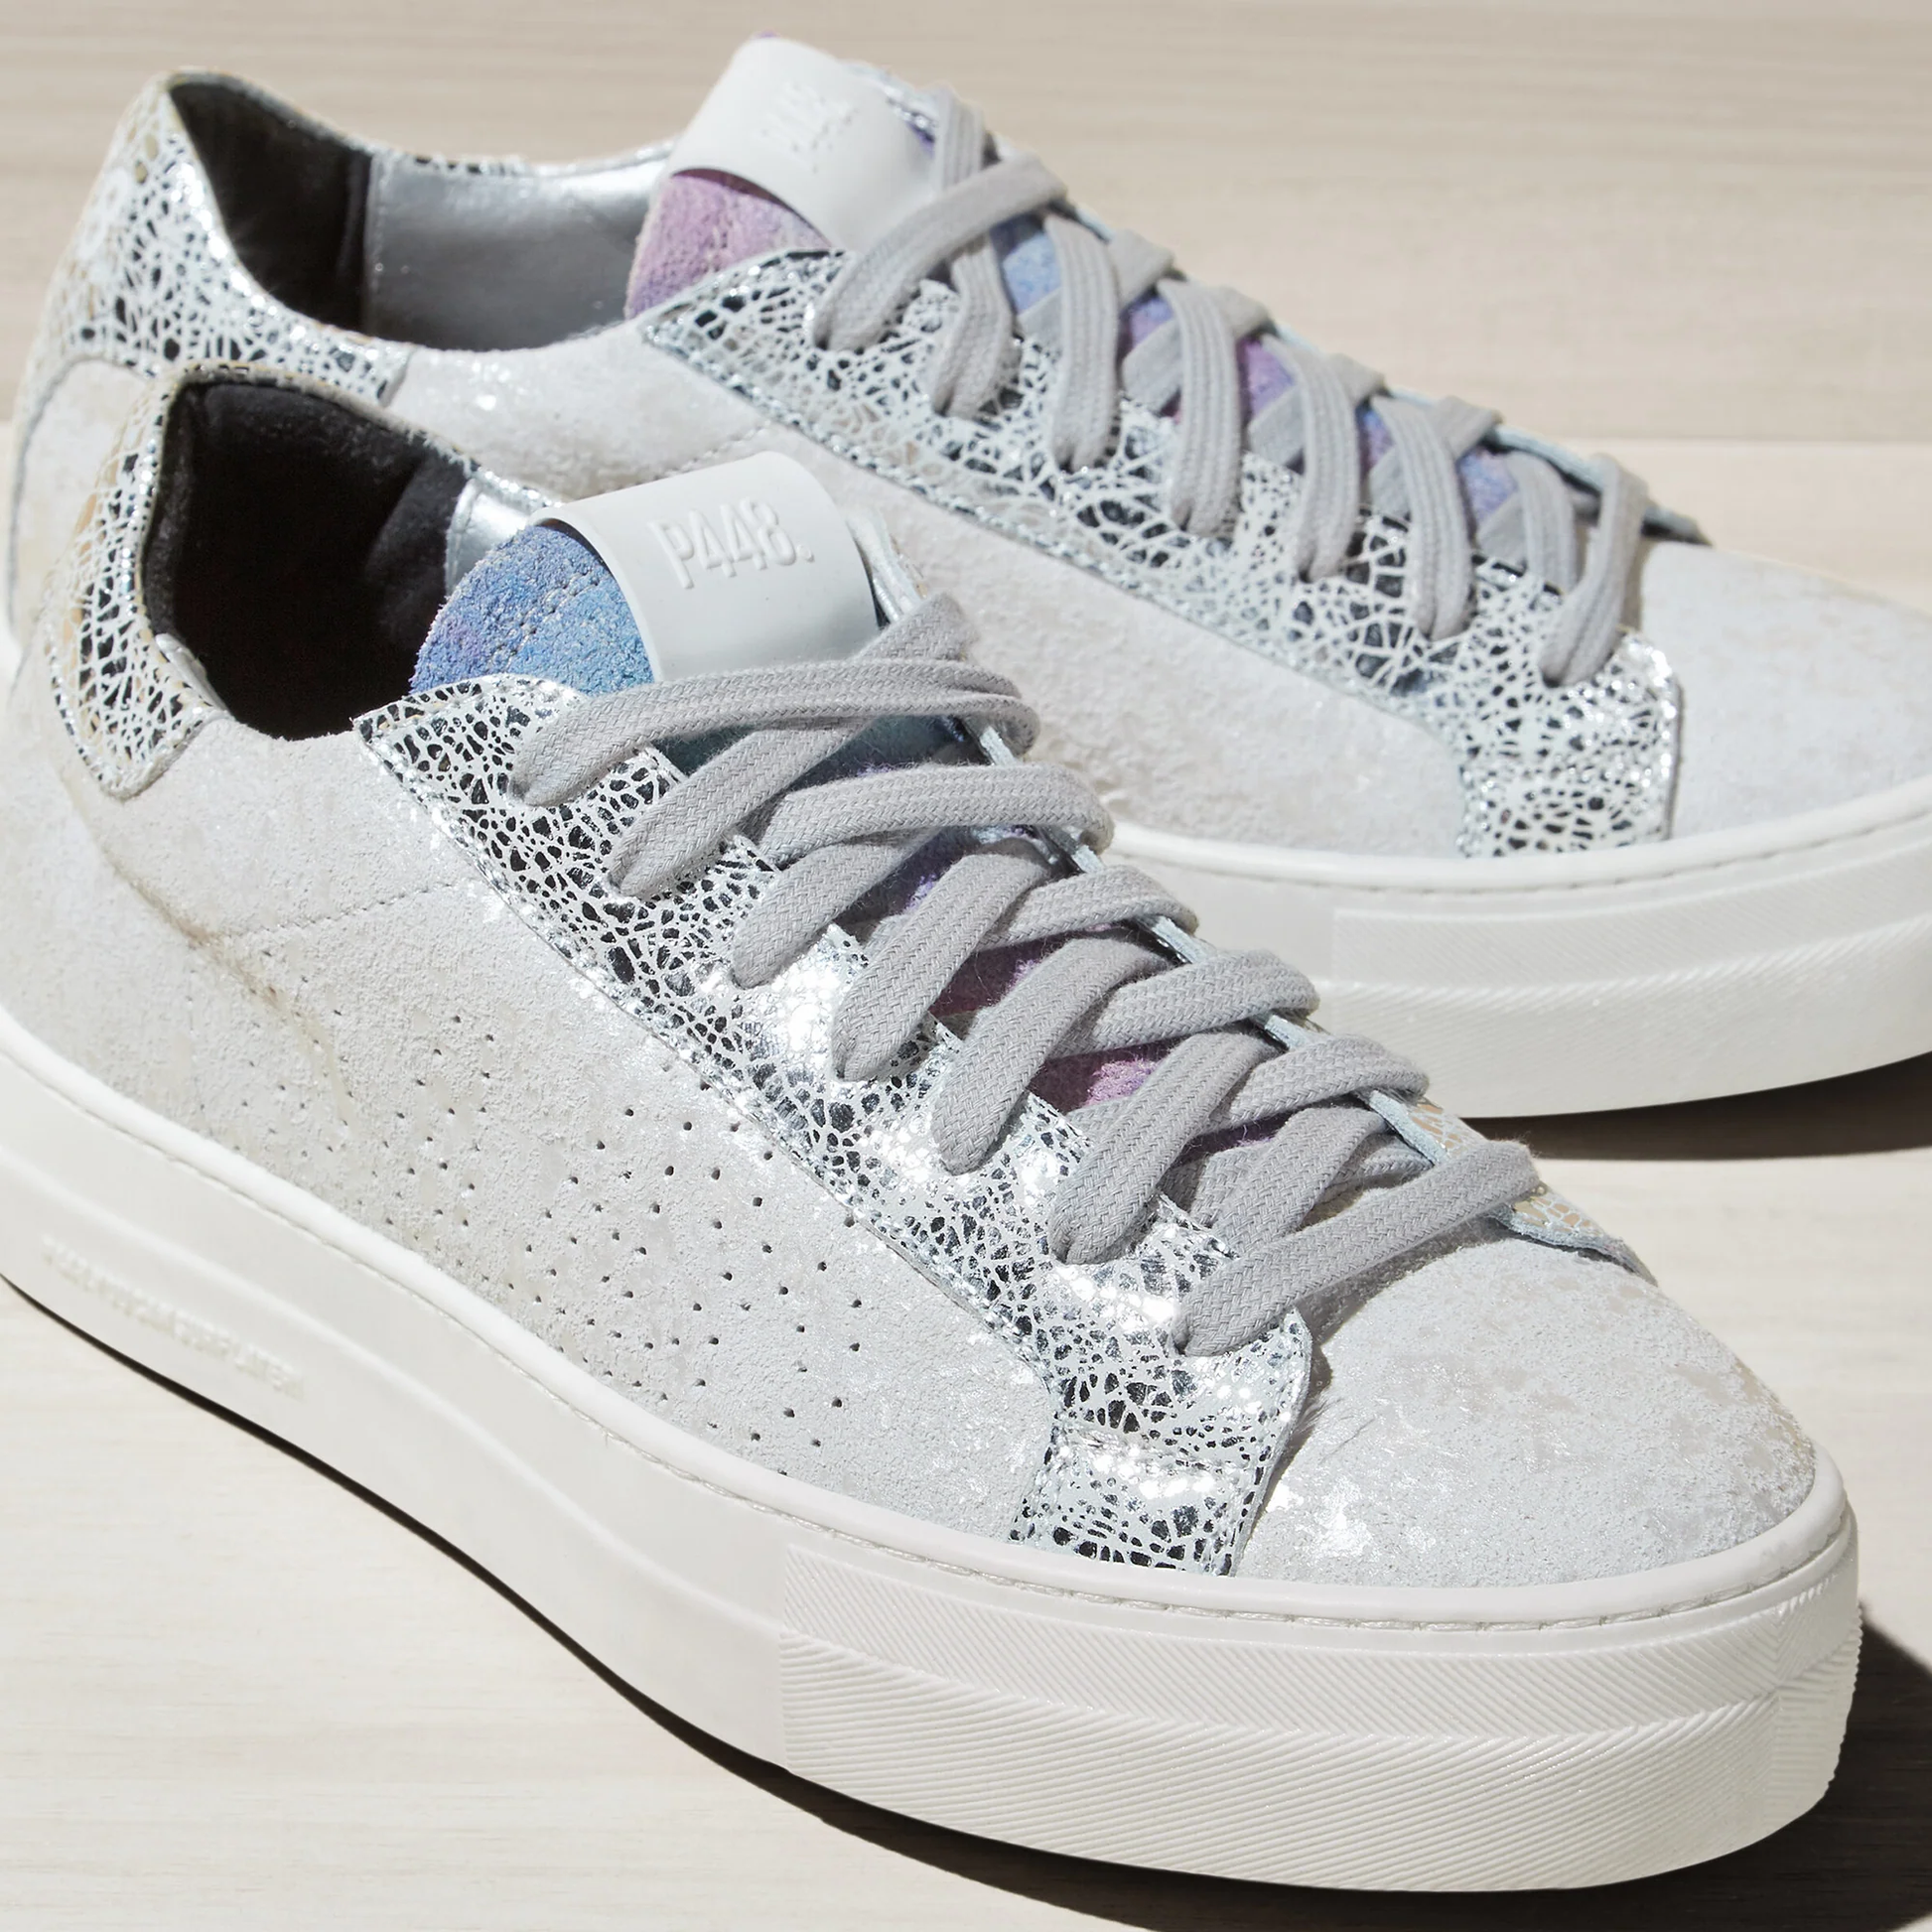 Louis Vuitton Glitter Accents Sneakers 10.5